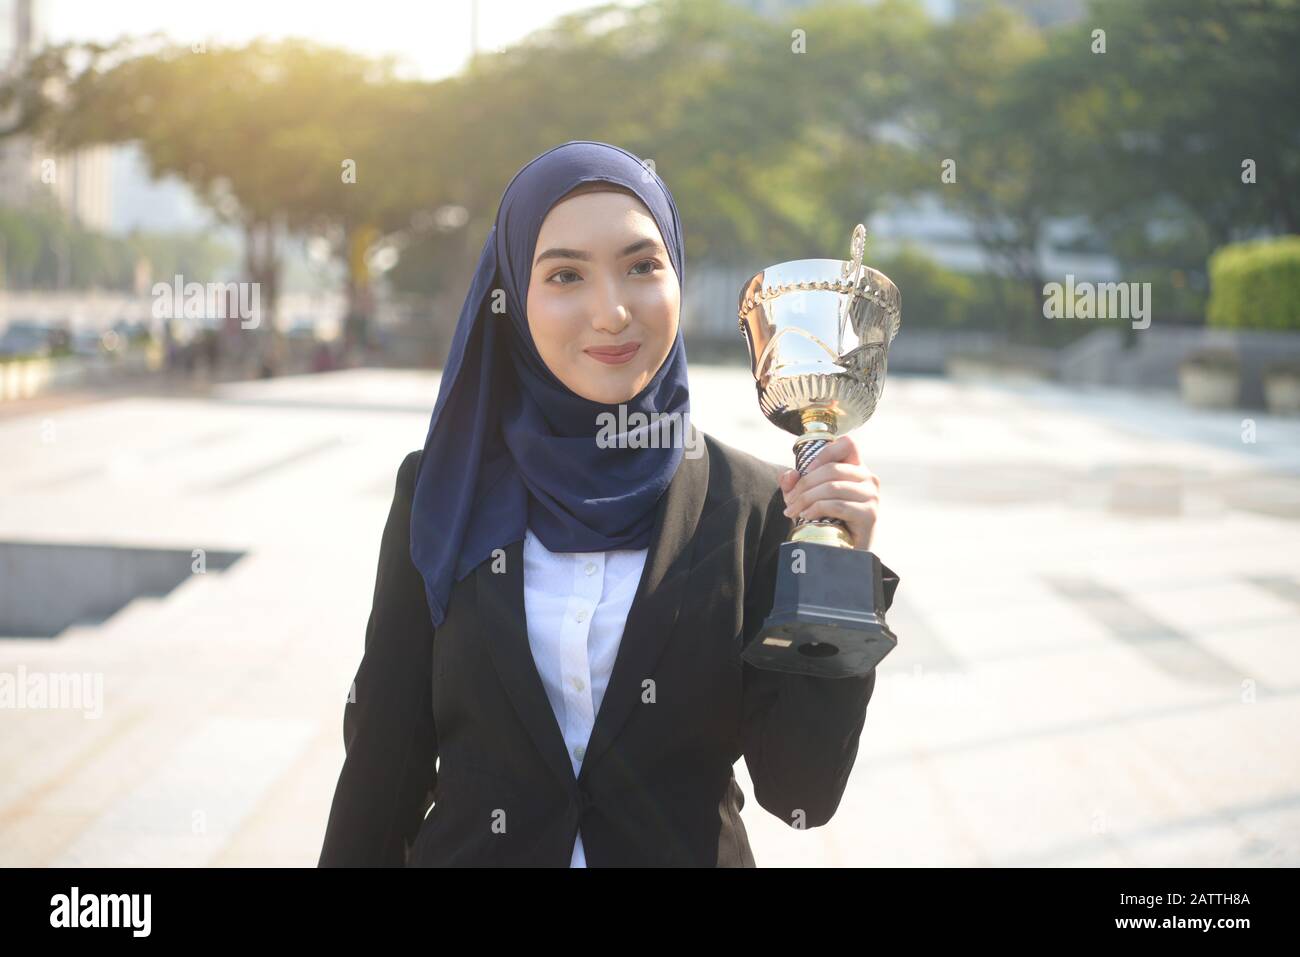 Young asian muslim woman in head scarf smile holding trophy symbol of success Stock Photo